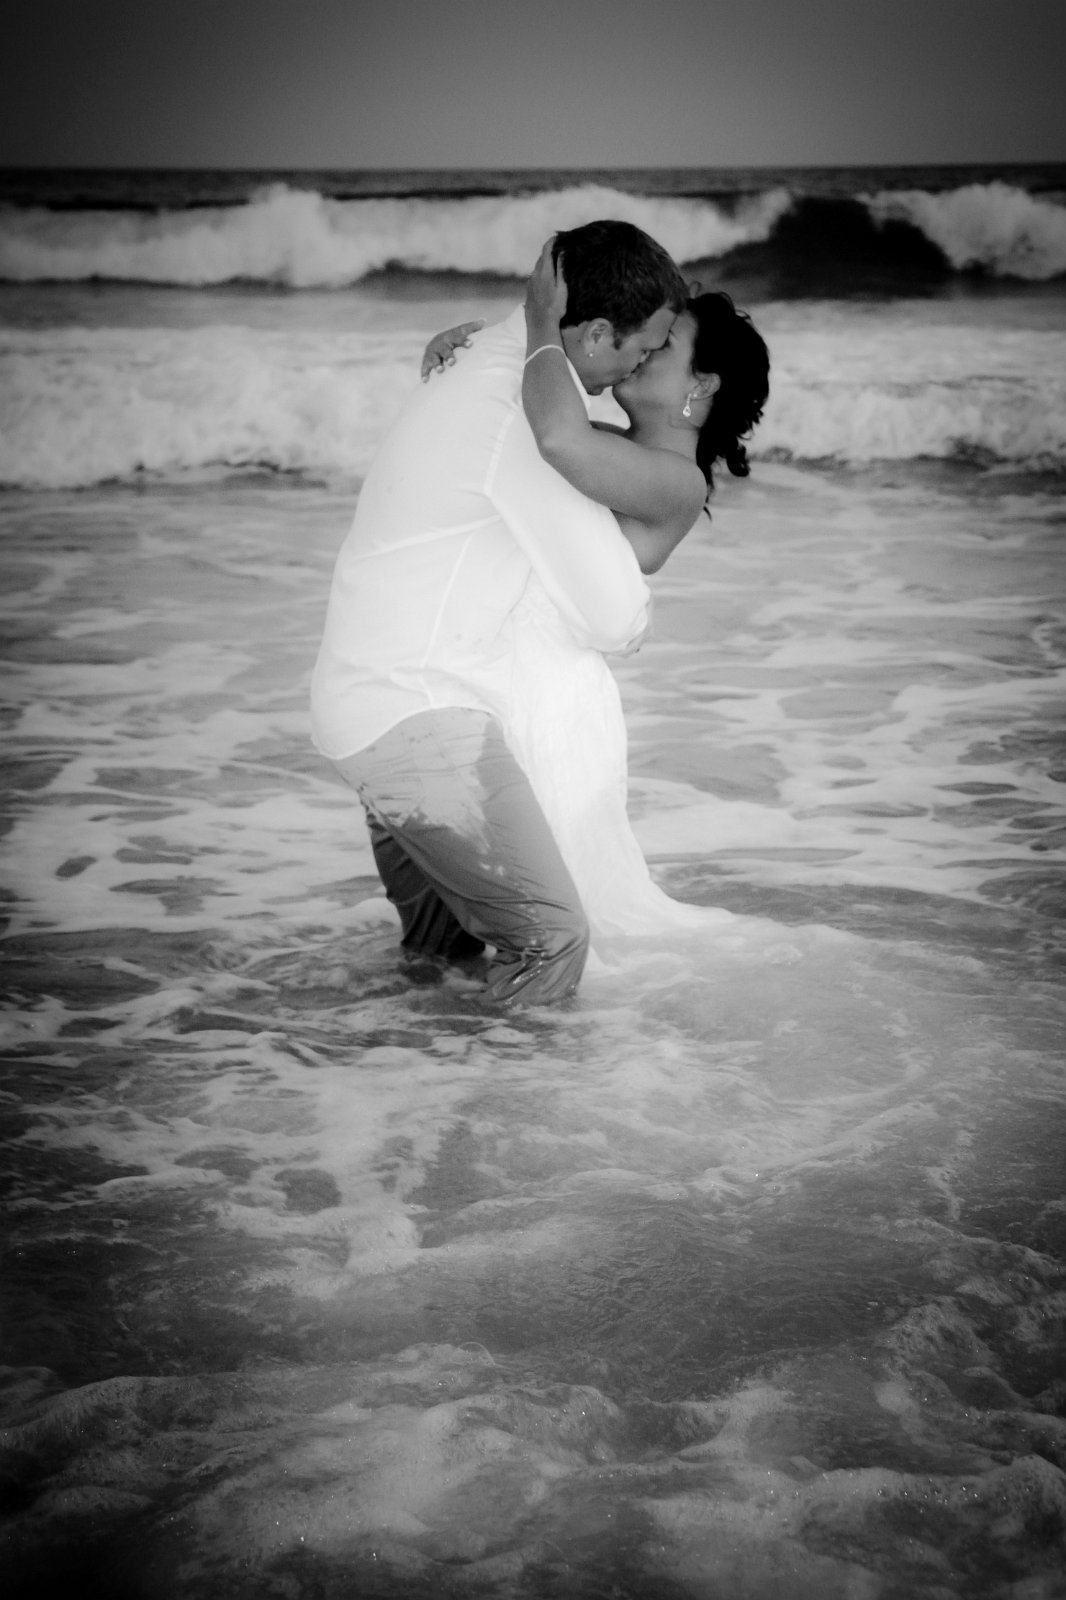 "Trash the Dress!" Photoshoot After the Beach Wedding